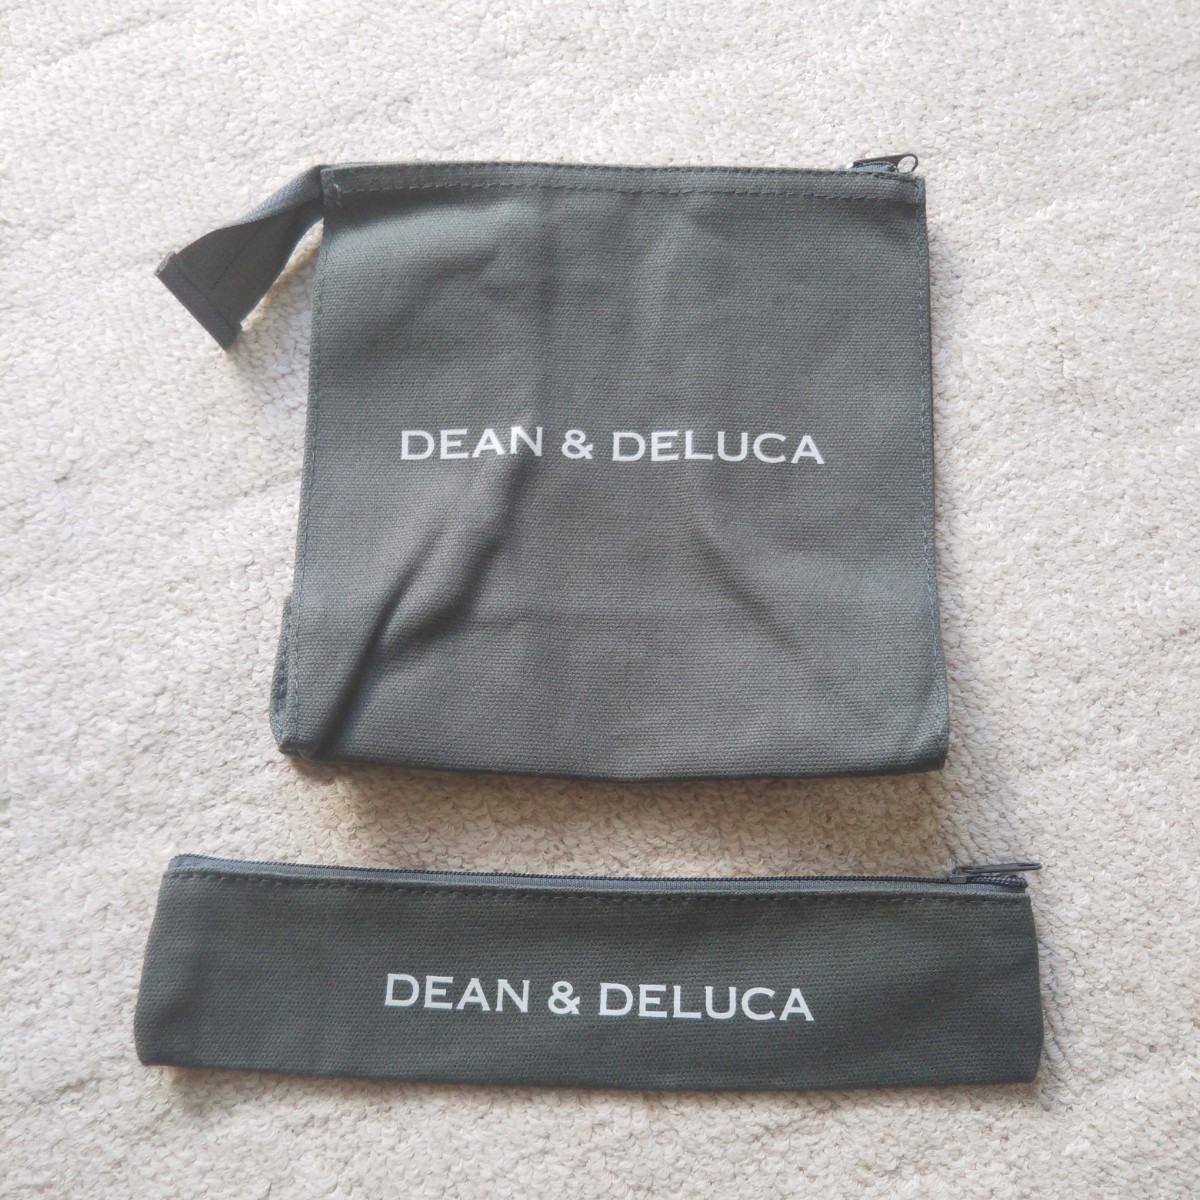 DEAN&DELUCA (グレー) ランチバッグ ポーチ ２点セット